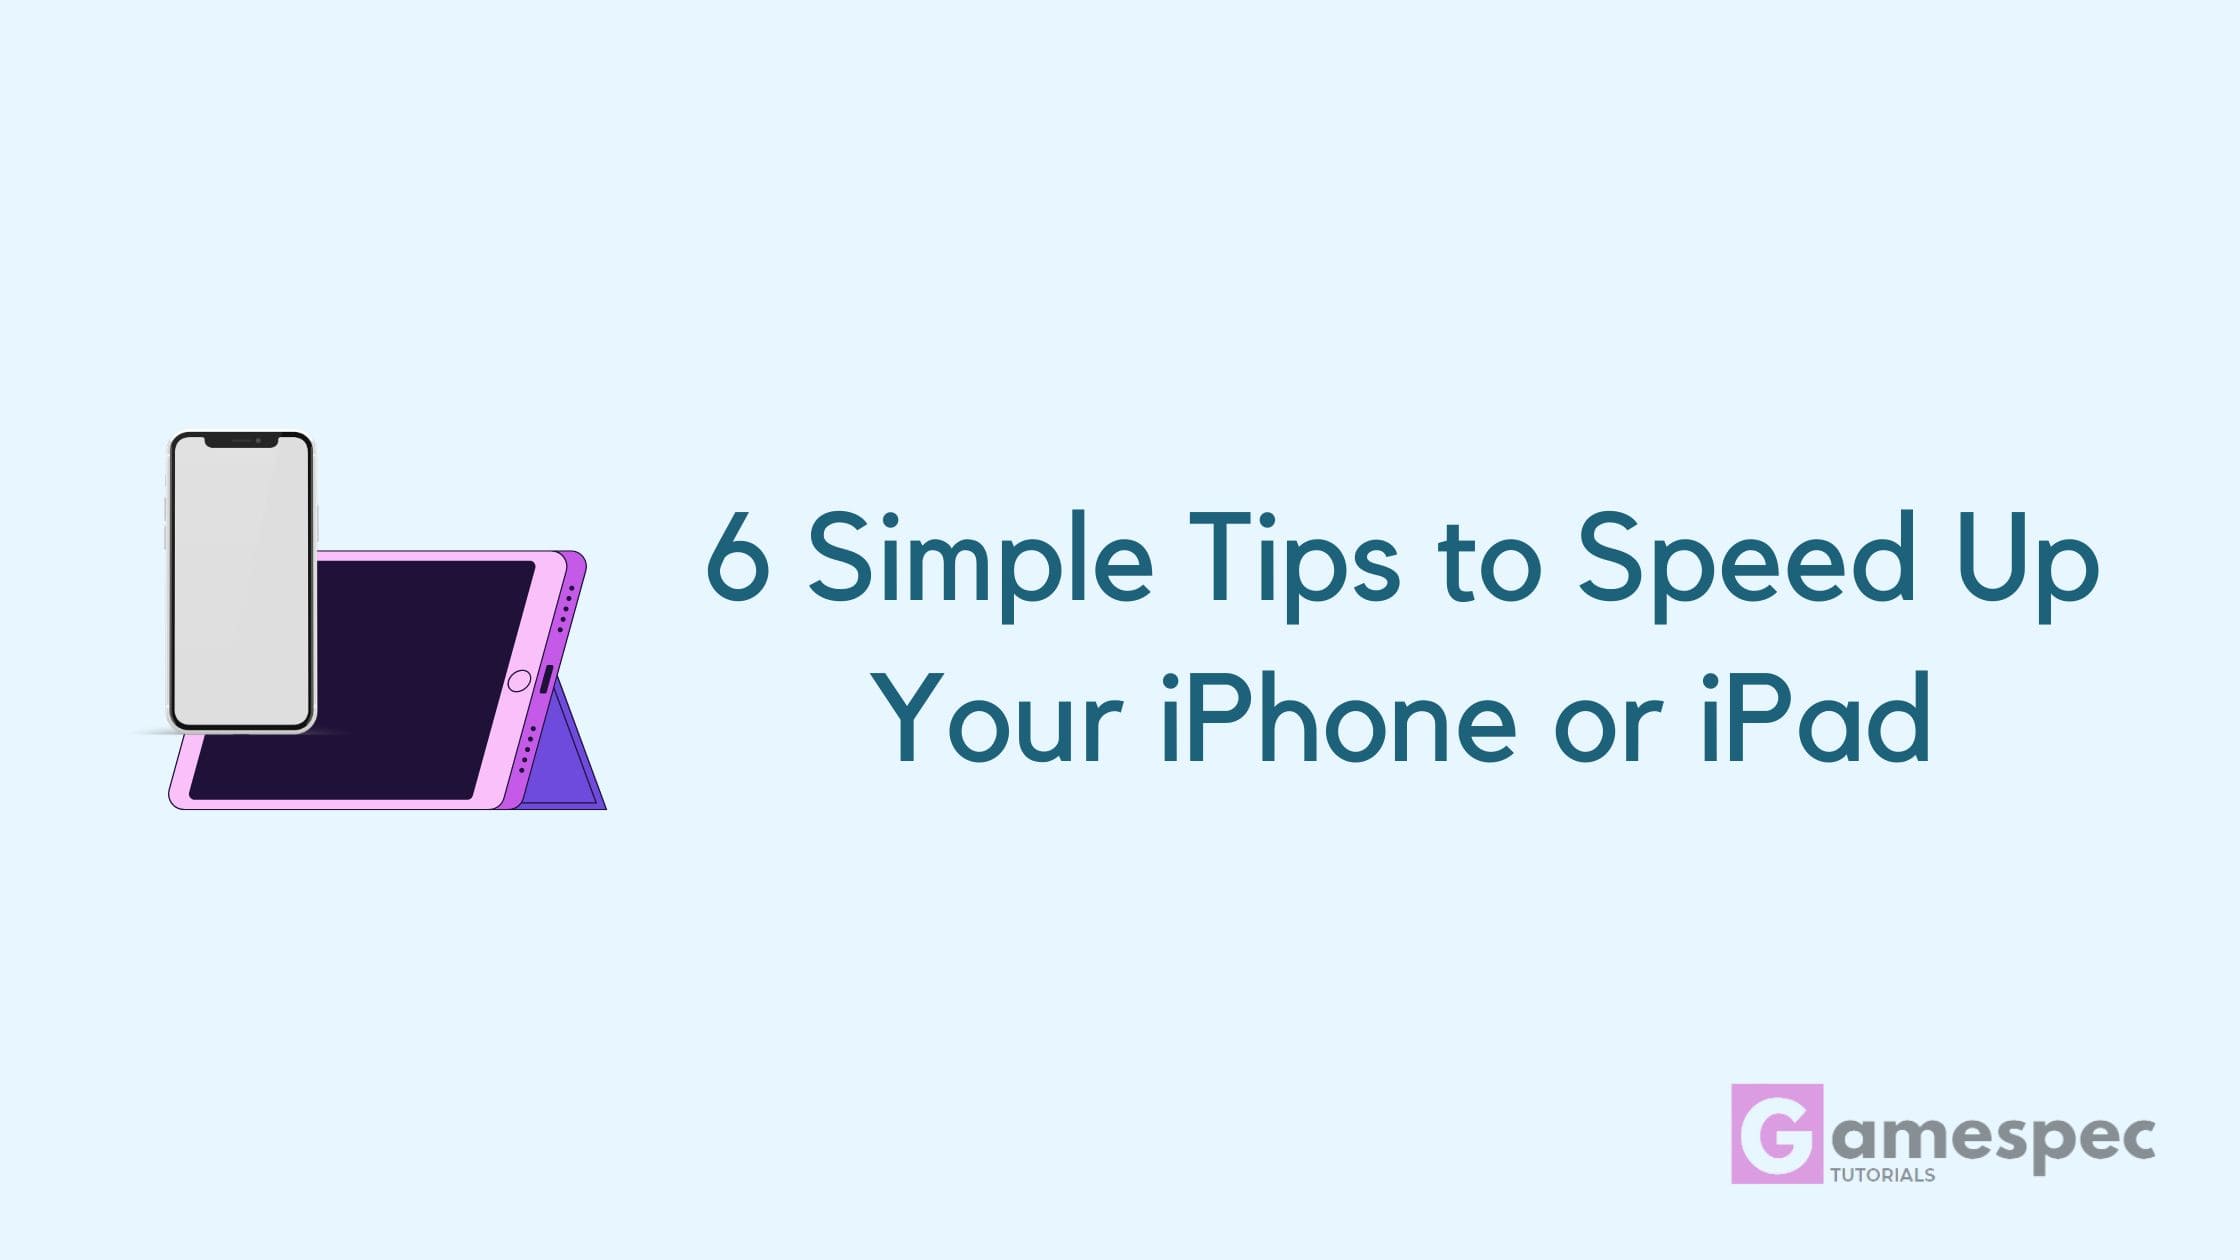 6 Simple Tips to Speed Up Your iPhone or iPad